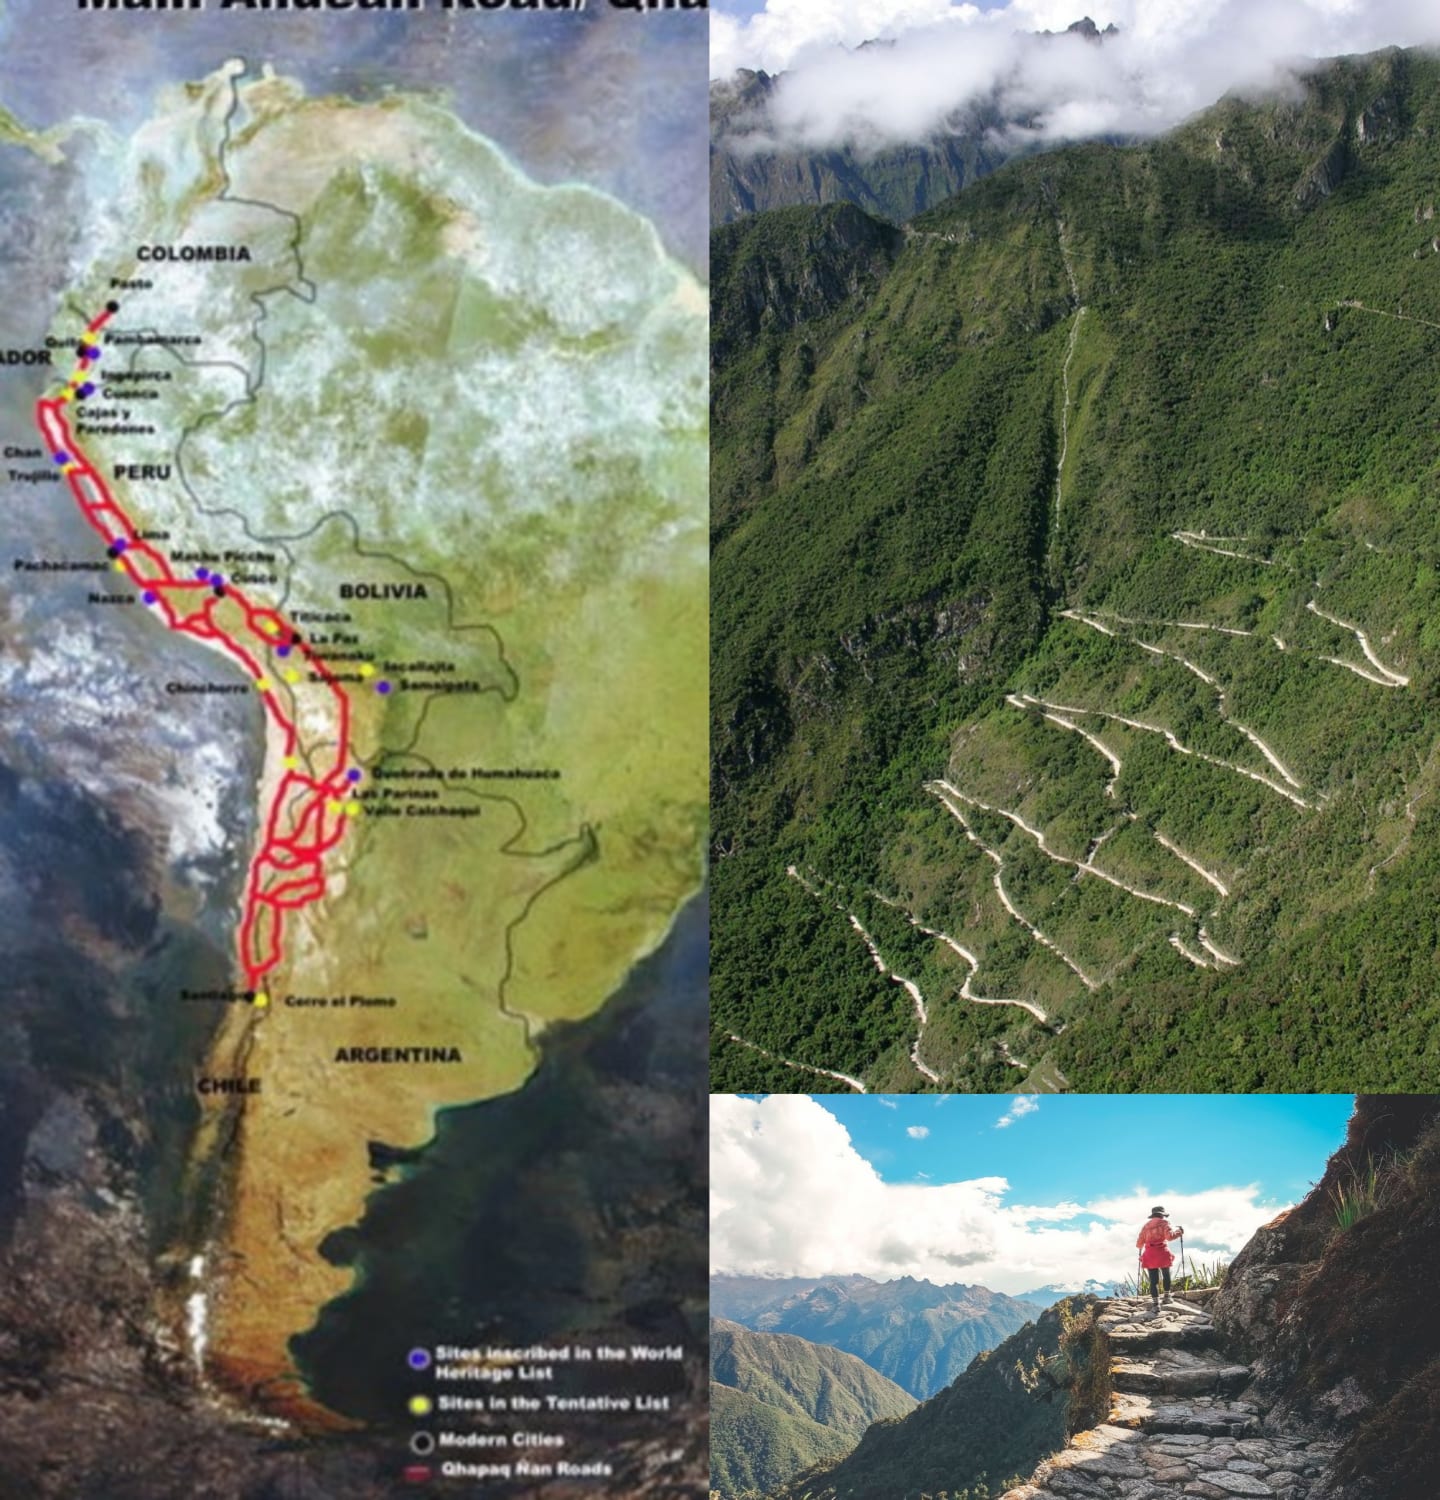 The Inca road system (also known as Qhapaq Ñan) was the most extensive and advanced transportation system in pre-Columbian South America. It was at least 40,000 kilometres long and facilitated the movement of armies, people, and goods across plains, deserts and mountains